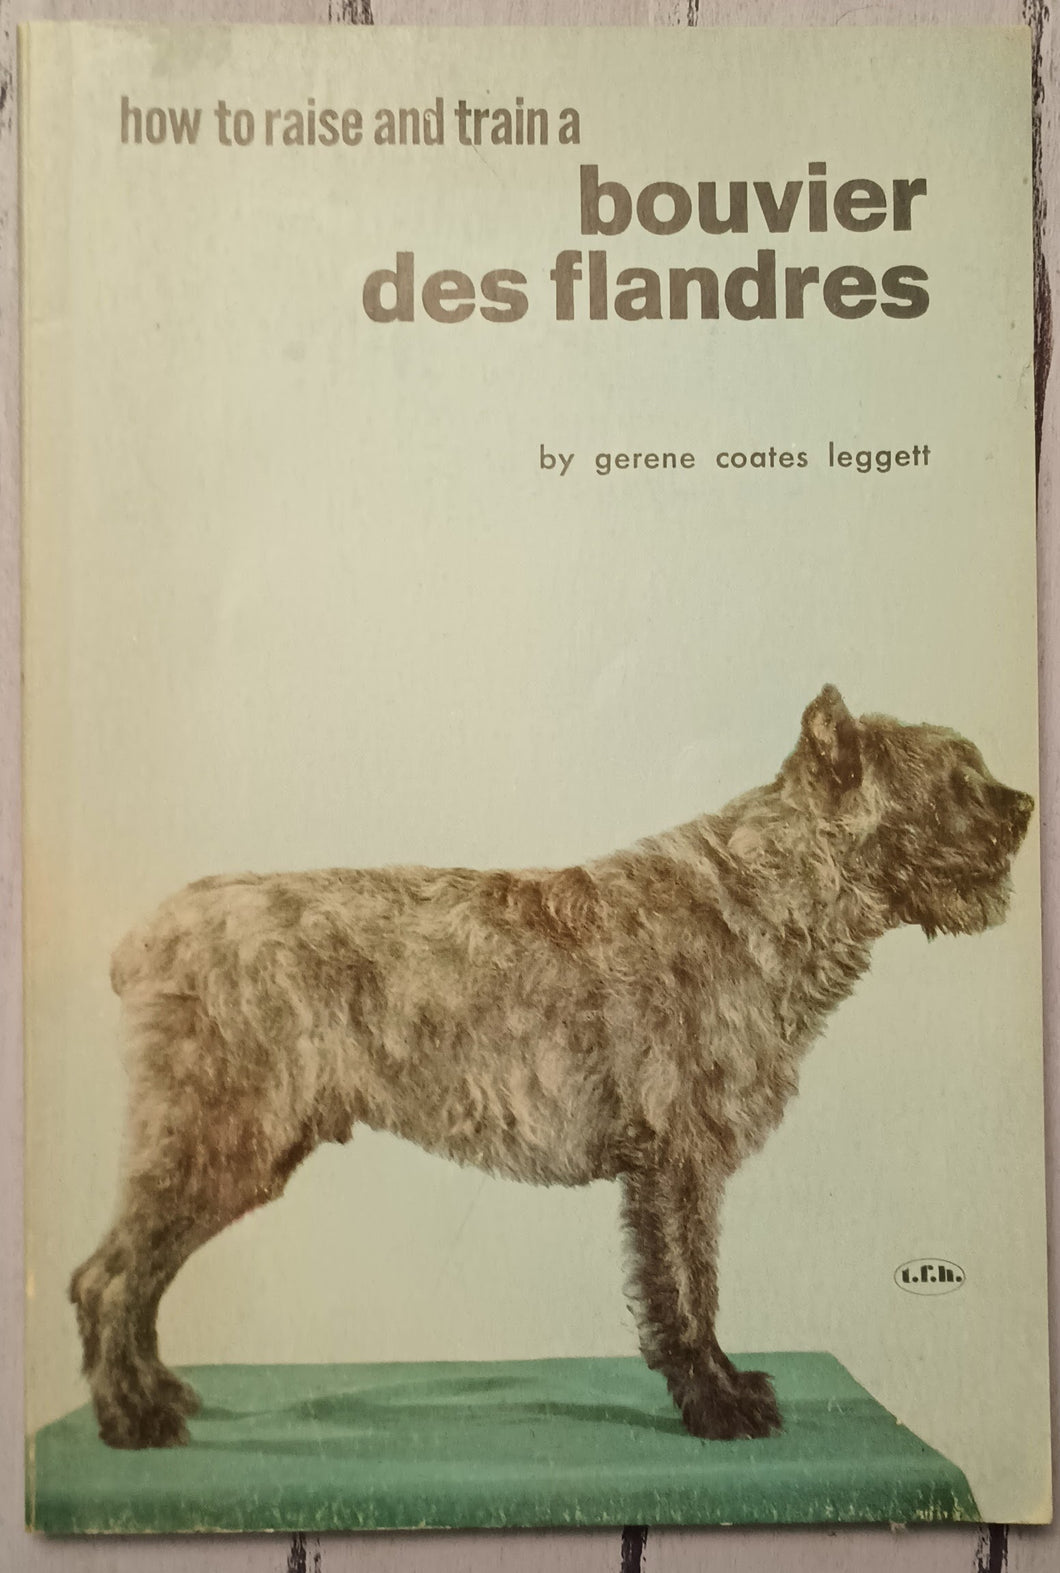 How to Raise and Train a Bouvier Des Flandres